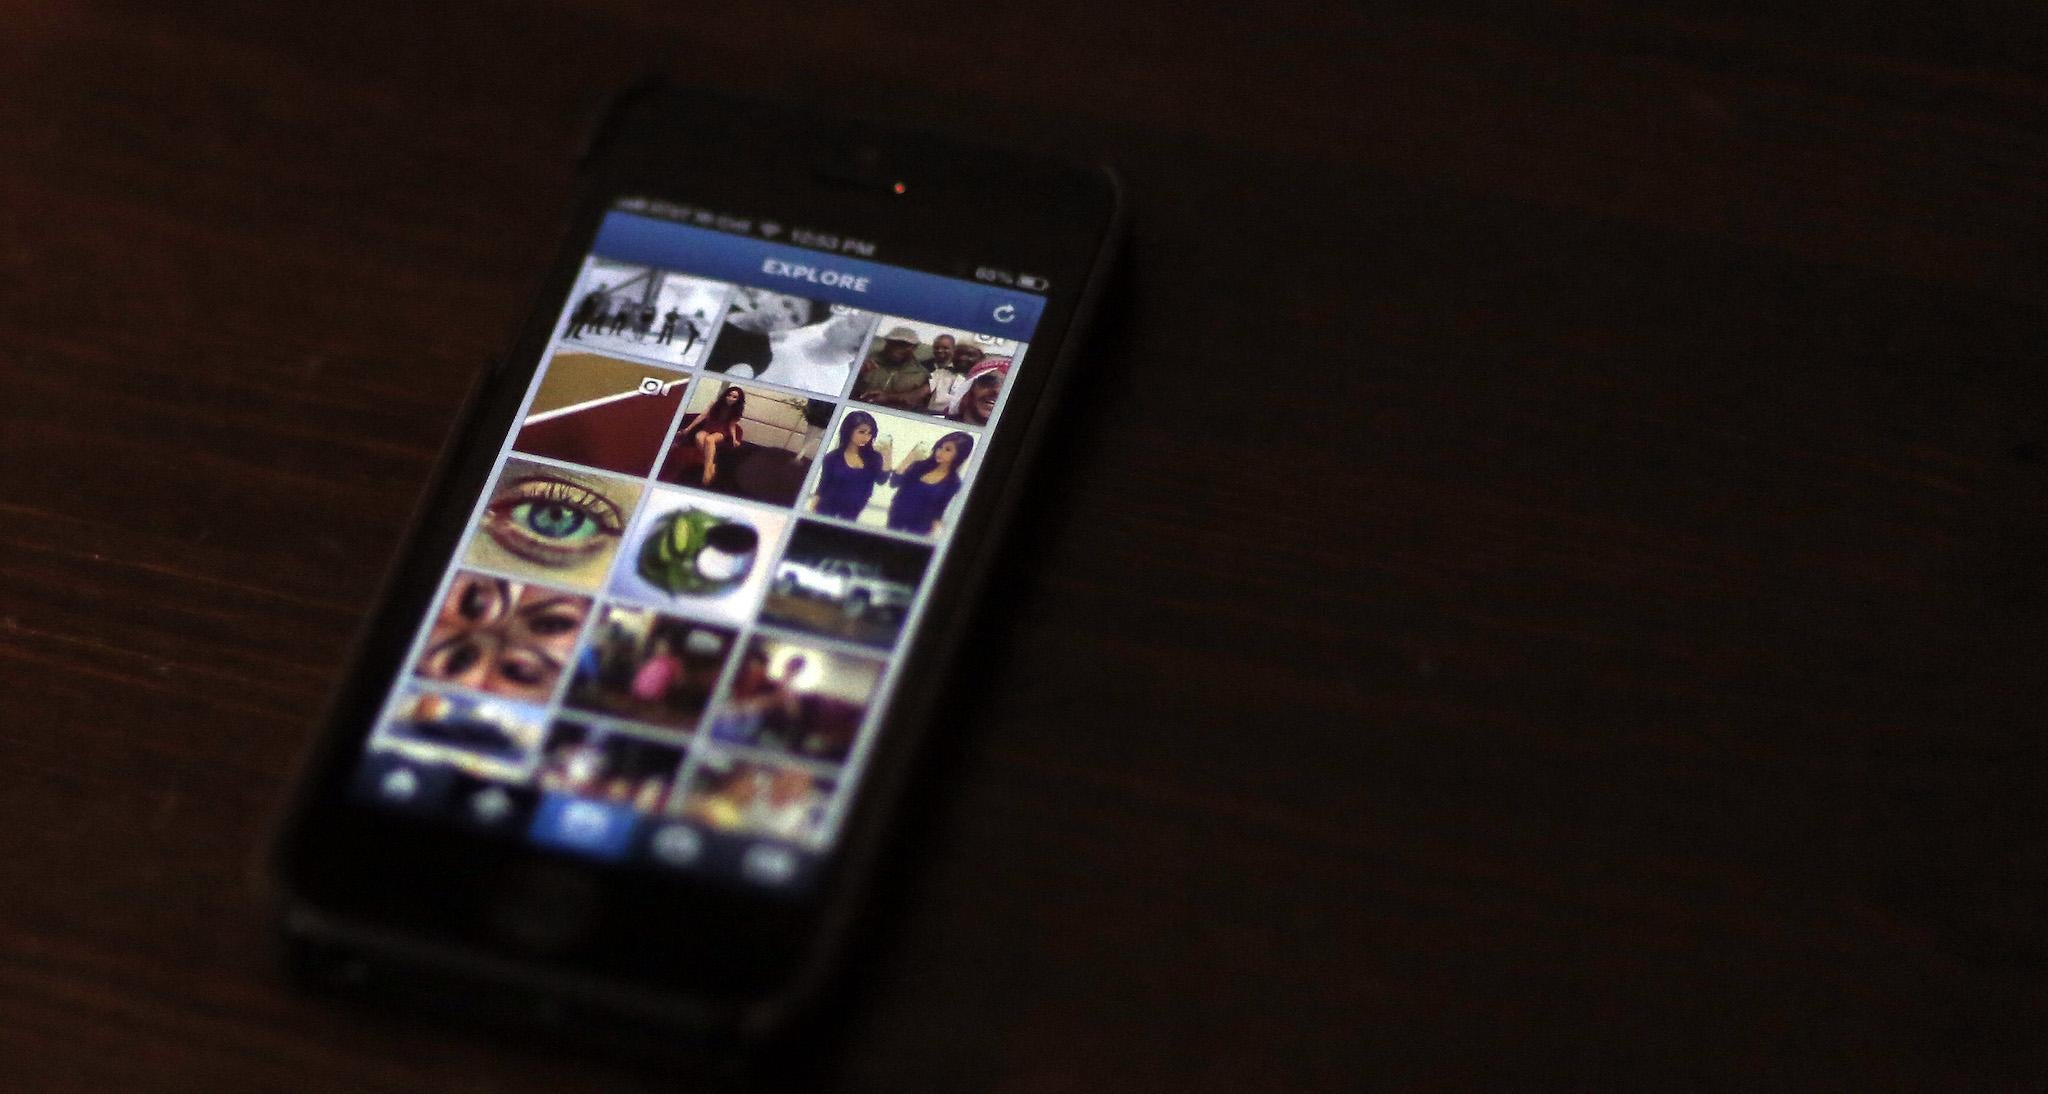 A most popular Instagram page is displayed on a mobile device screen in Pasadena, California